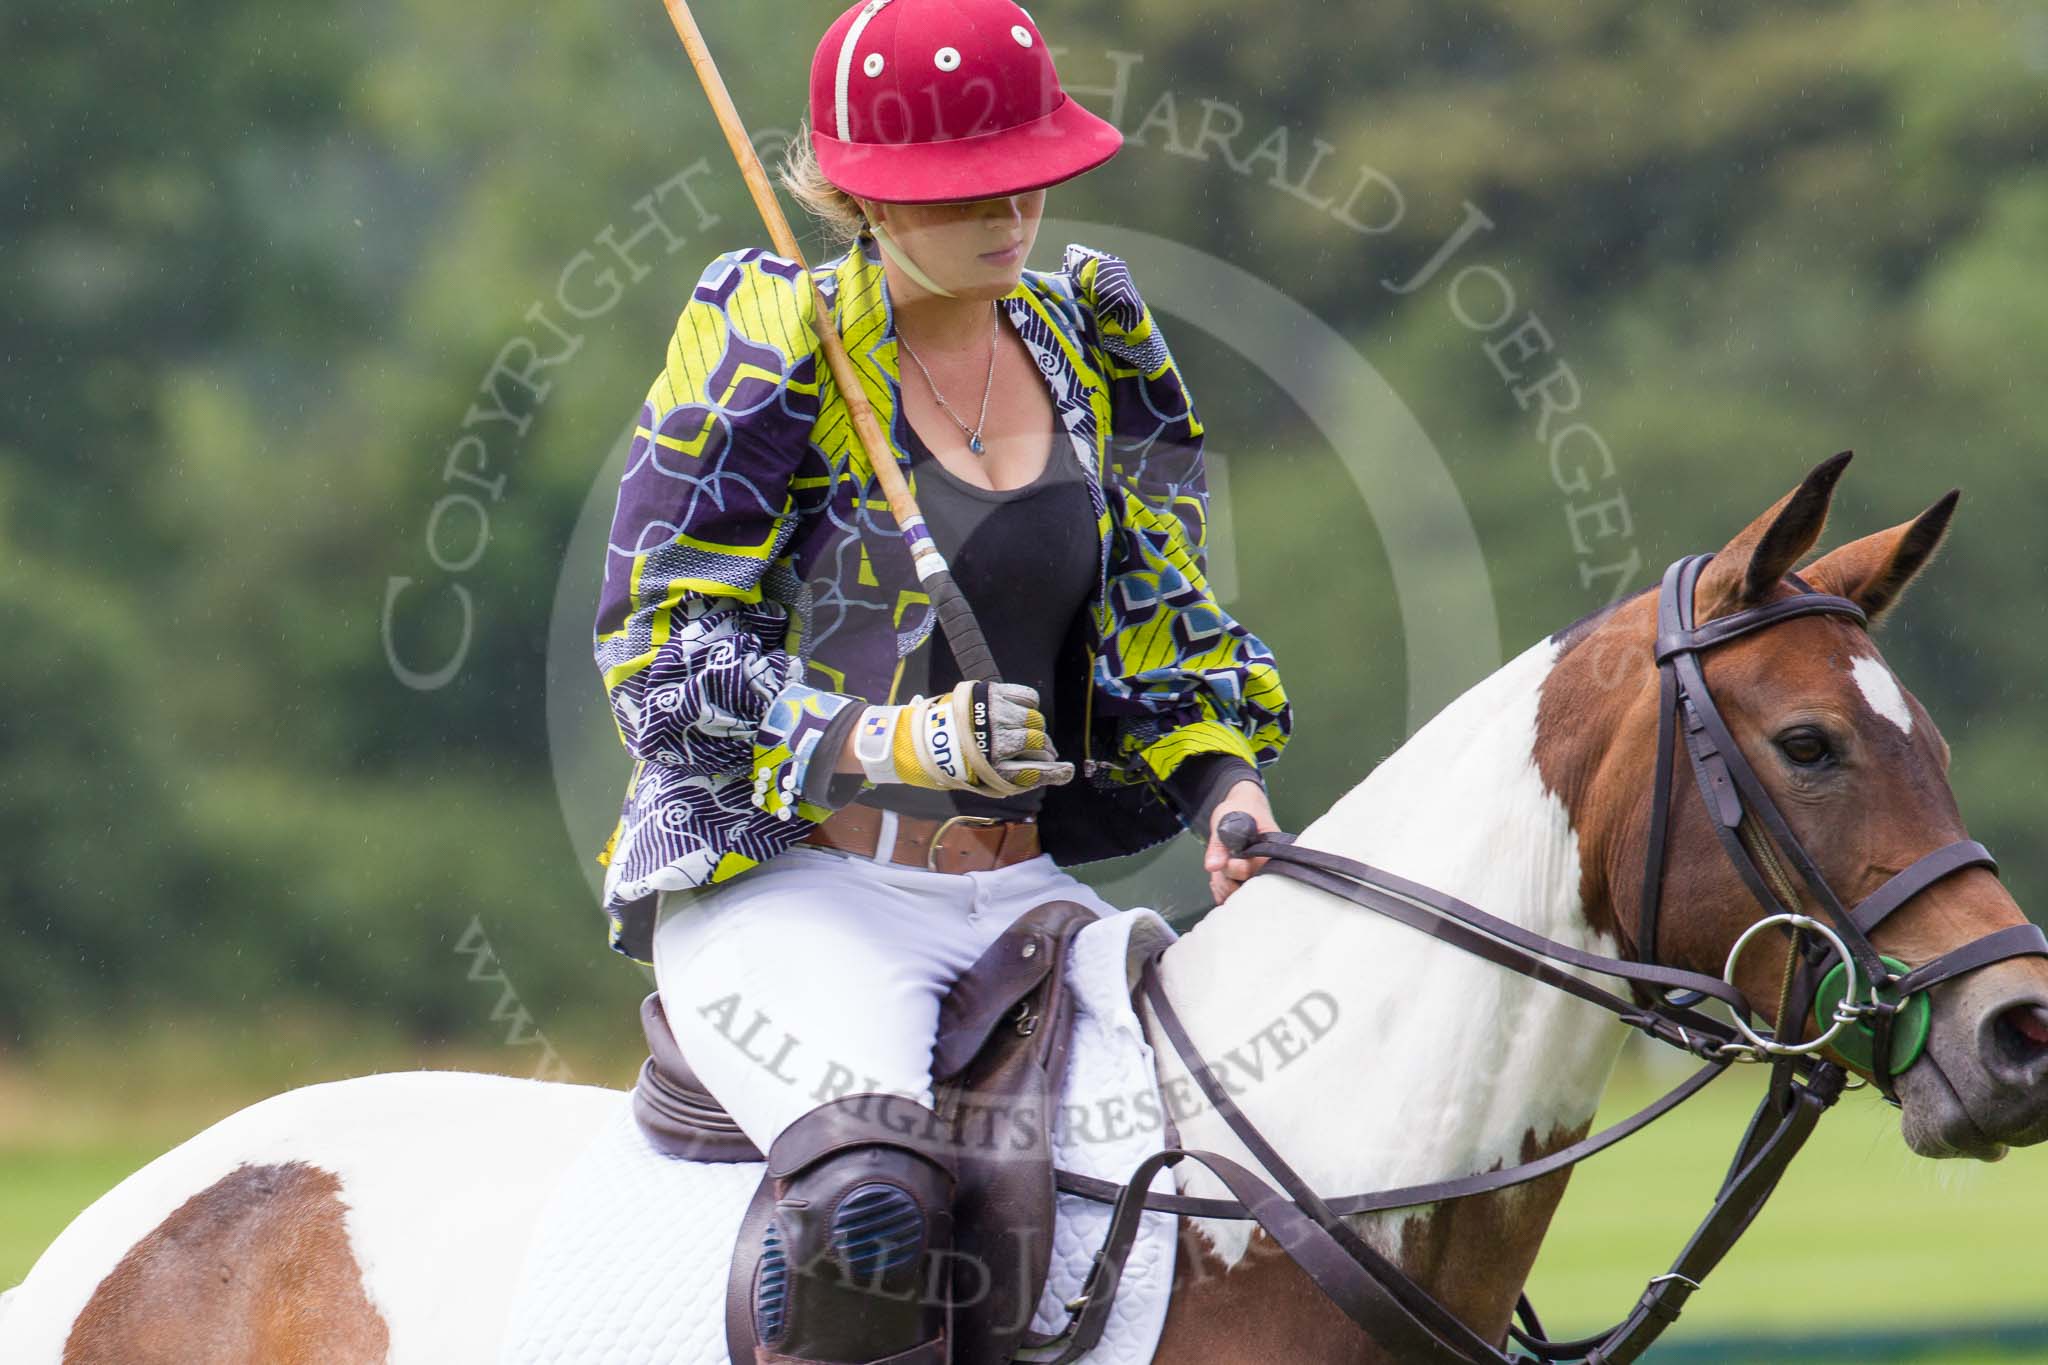 7th Heritage Polo Cup semi-finals: Sophie Kyriazy wearing Nigerian Fashion Design DZNY sponsored by AMG PETROENERGY..
Hurtwood Park Polo Club,
Ewhurst Green,
Surrey,
United Kingdom,
on 04 August 2012 at 13:36, image #164